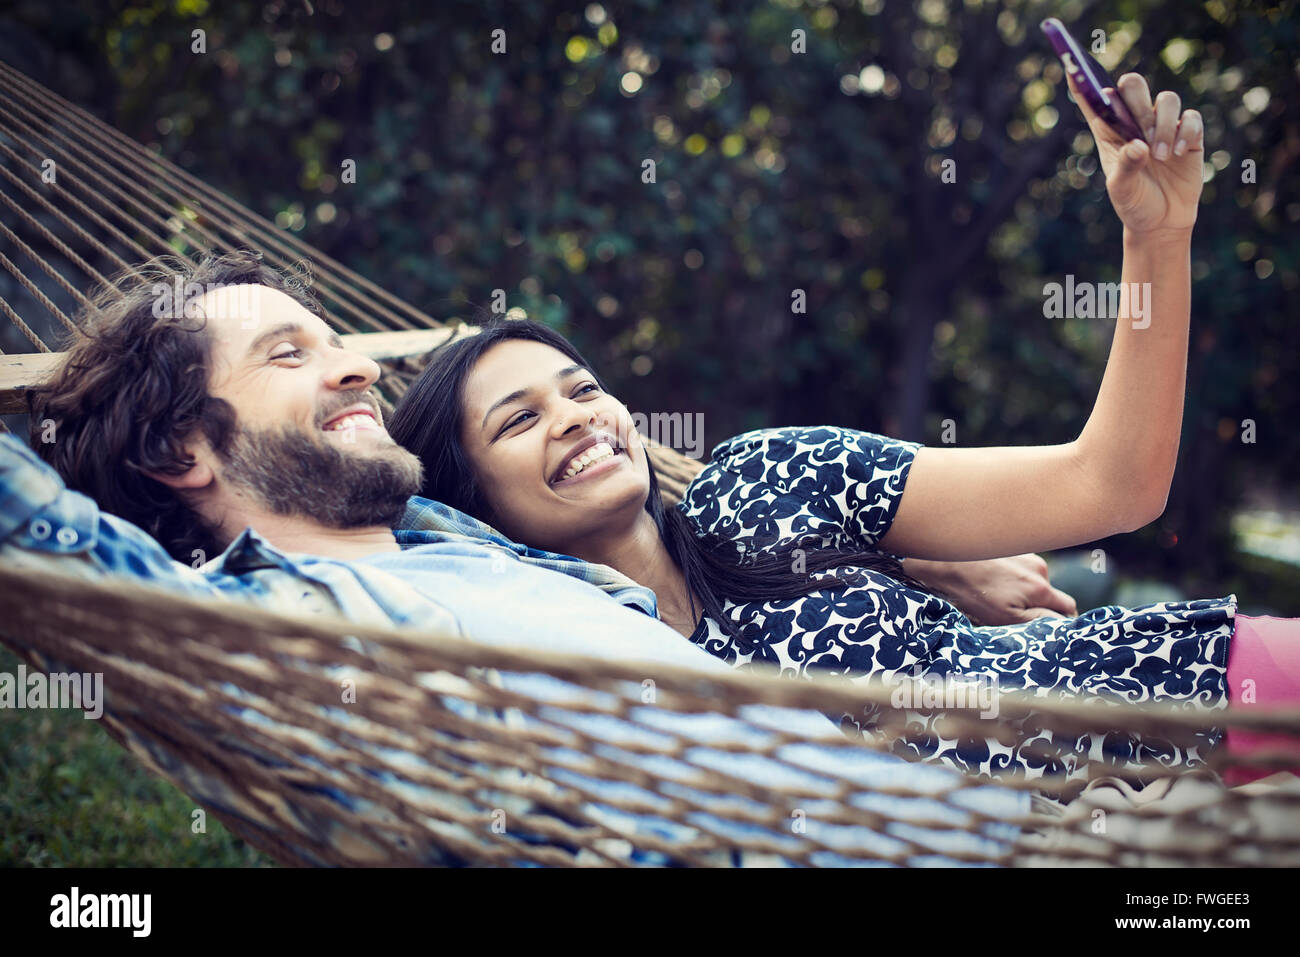 A couple, a young man and woman lying in a large hammock in the garden, taking a selfy of themselves. Stock Photo